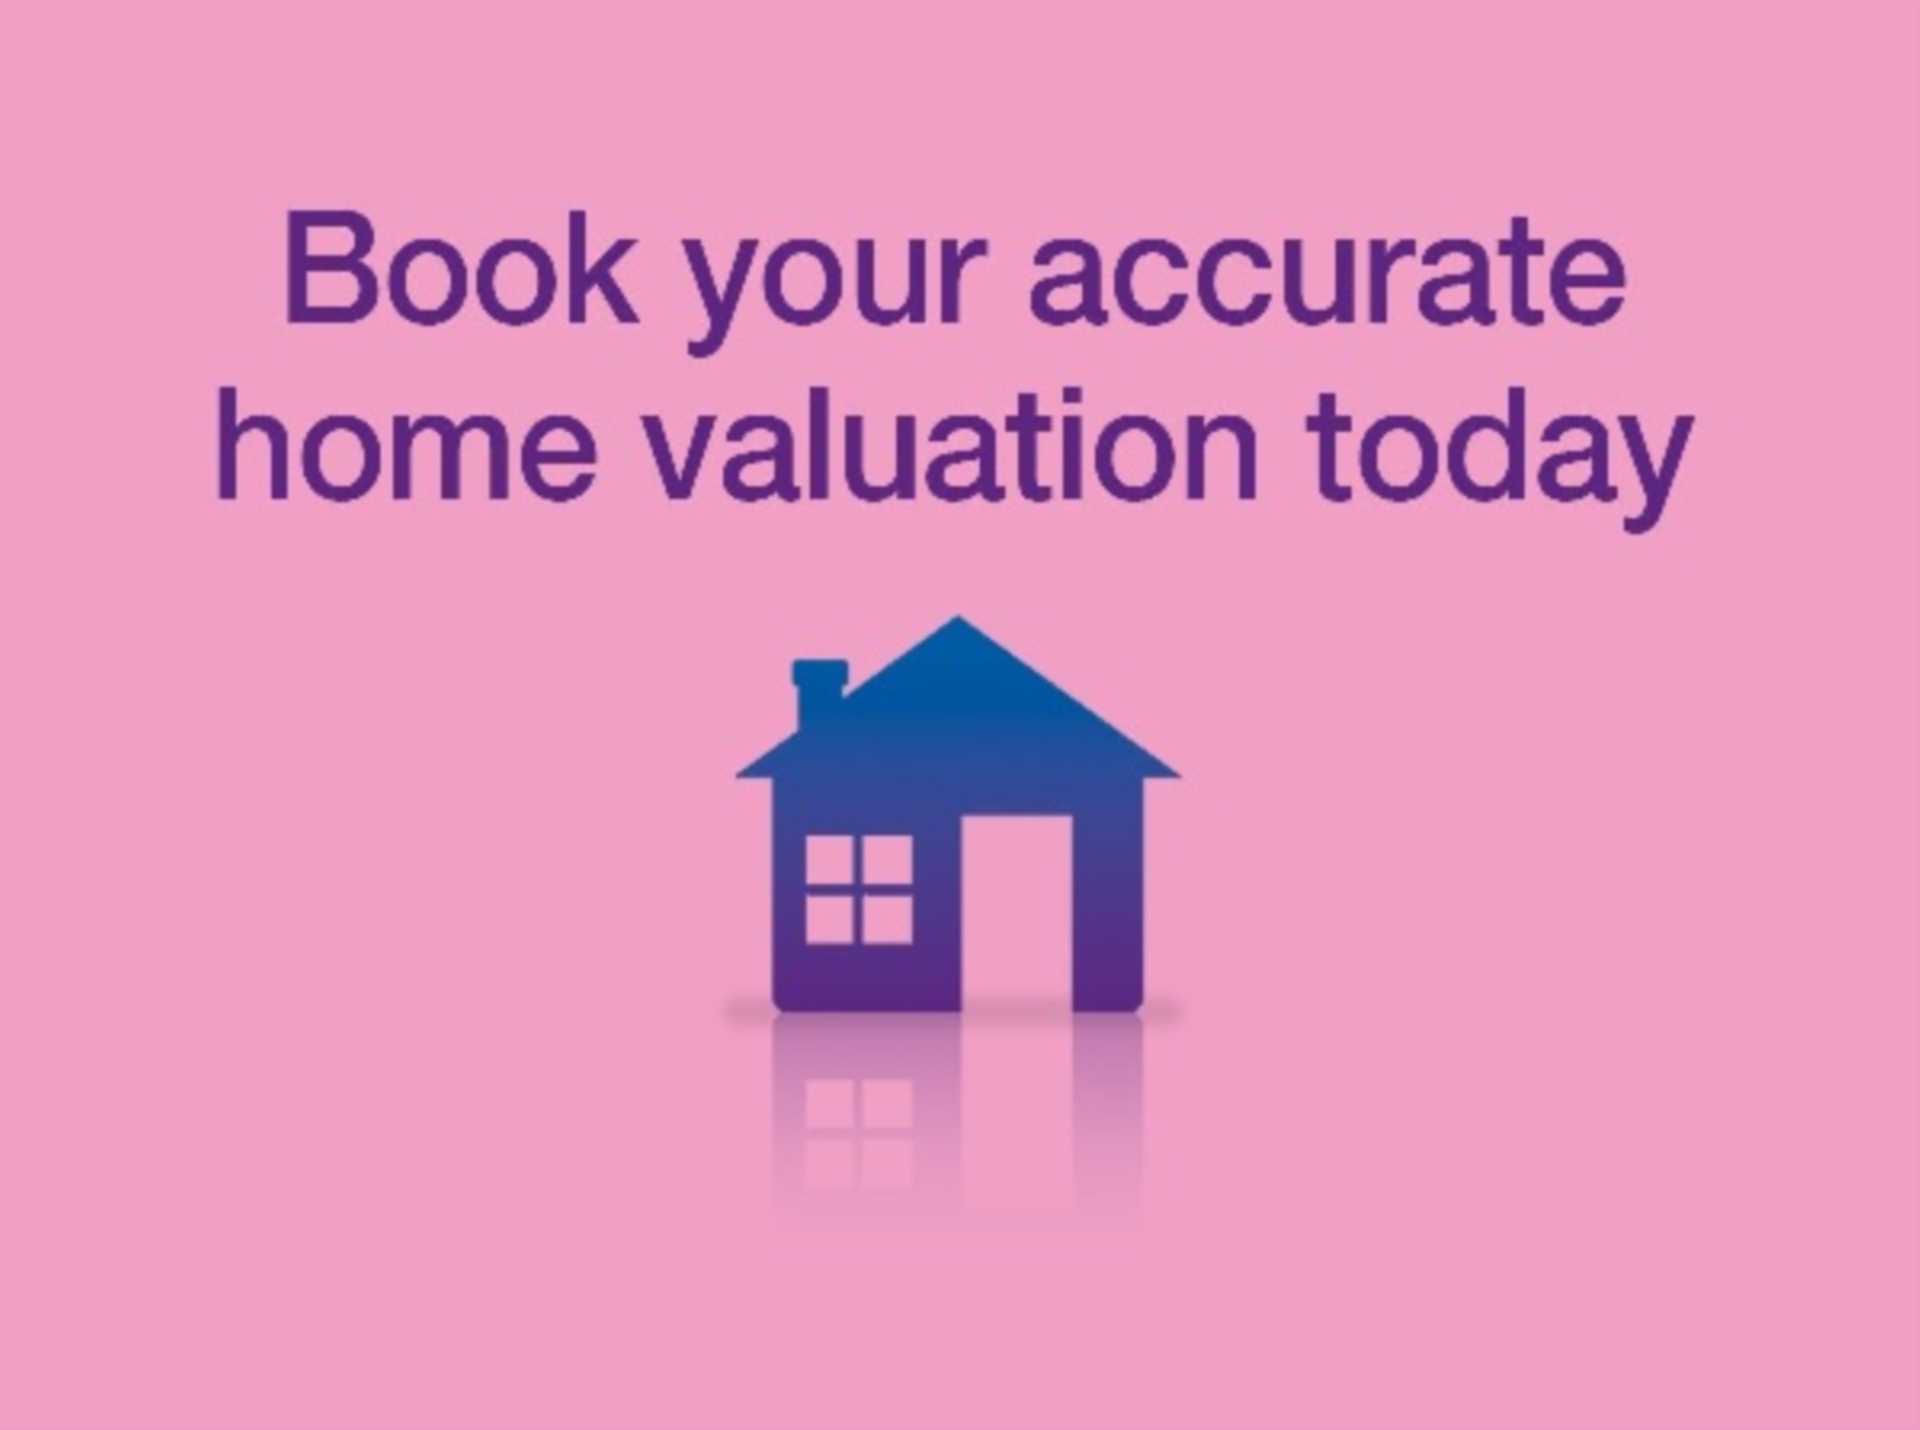 Book an accurate home valuation